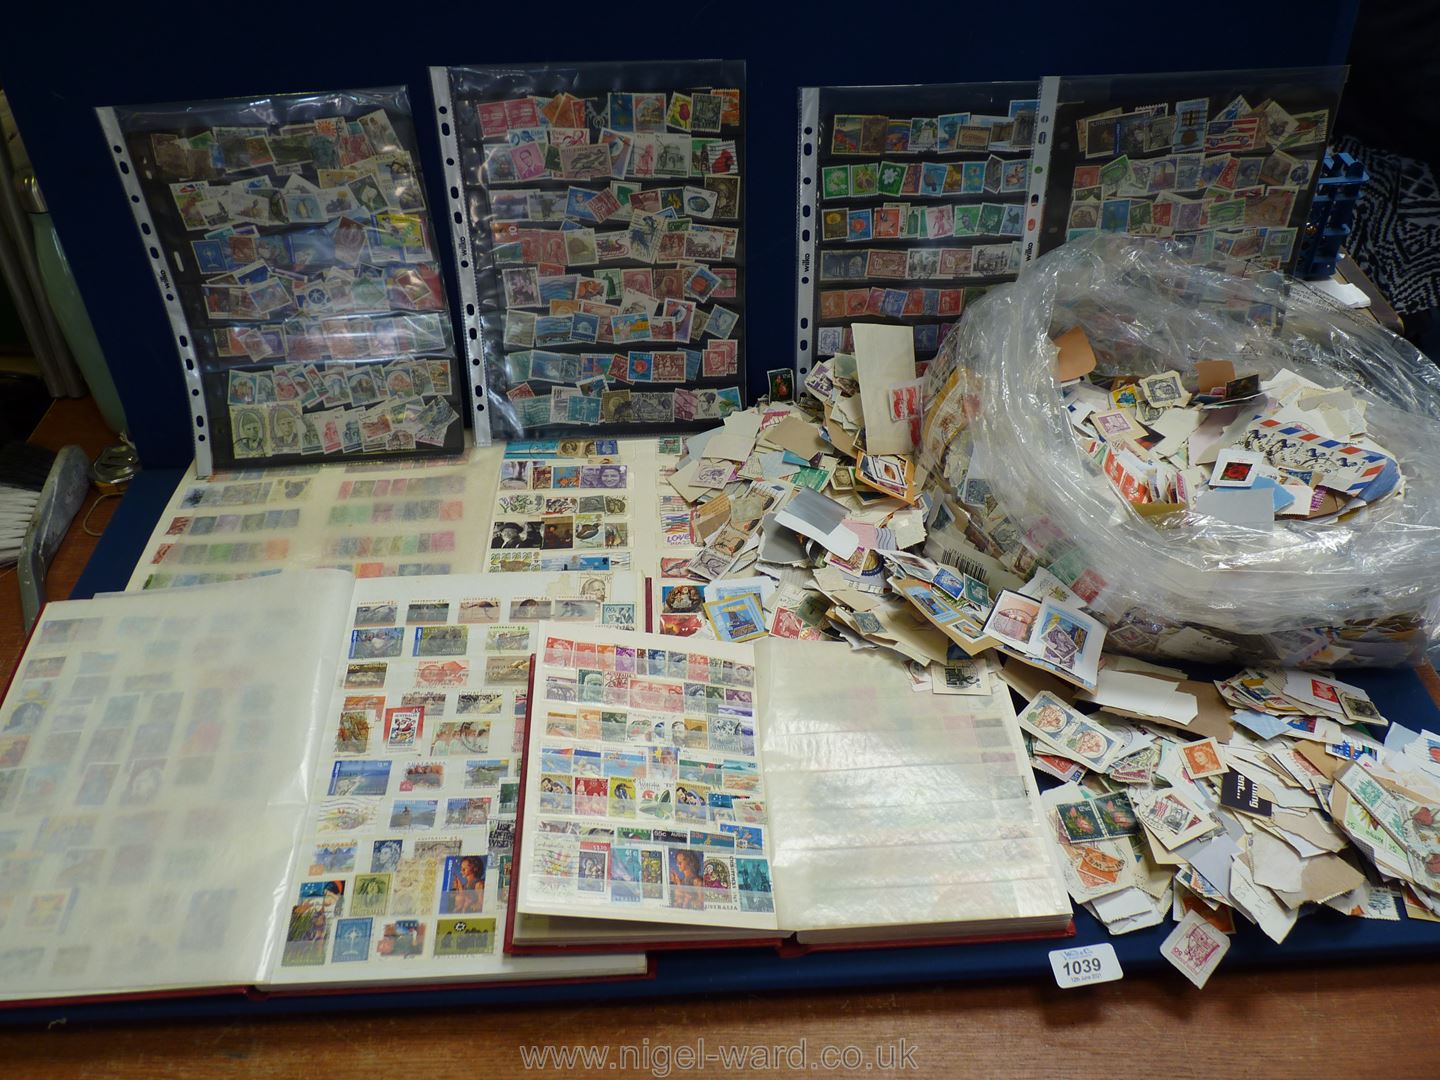 A quantity of stock books filled with English and foreign stamps and a large quantity of loose